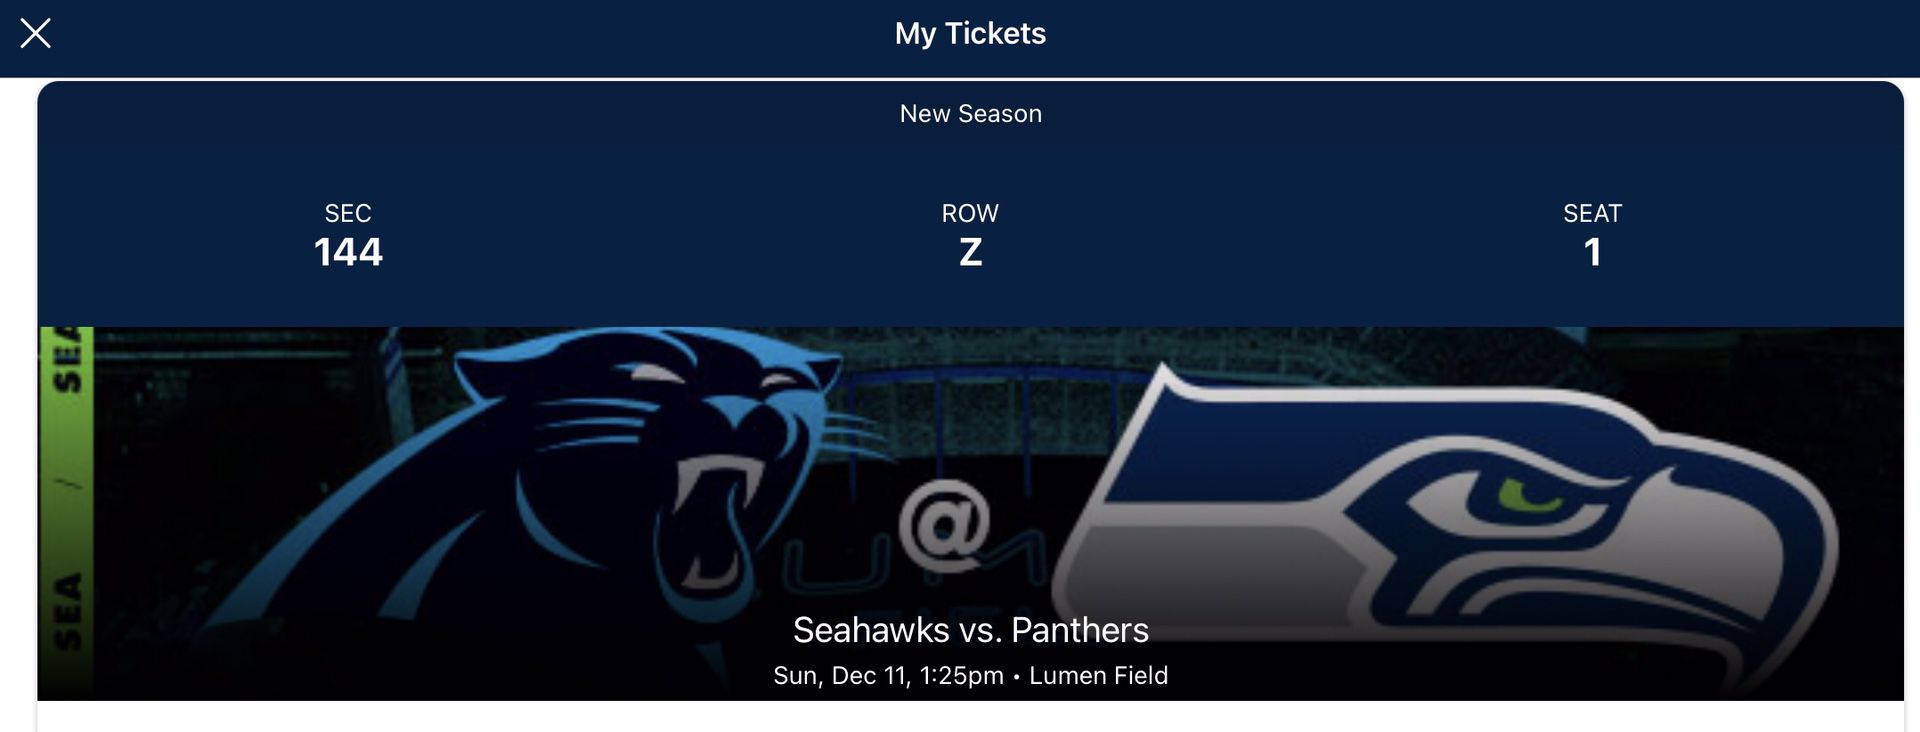 Seahawks vs Panthers Lower Level  Make Me An Offer 